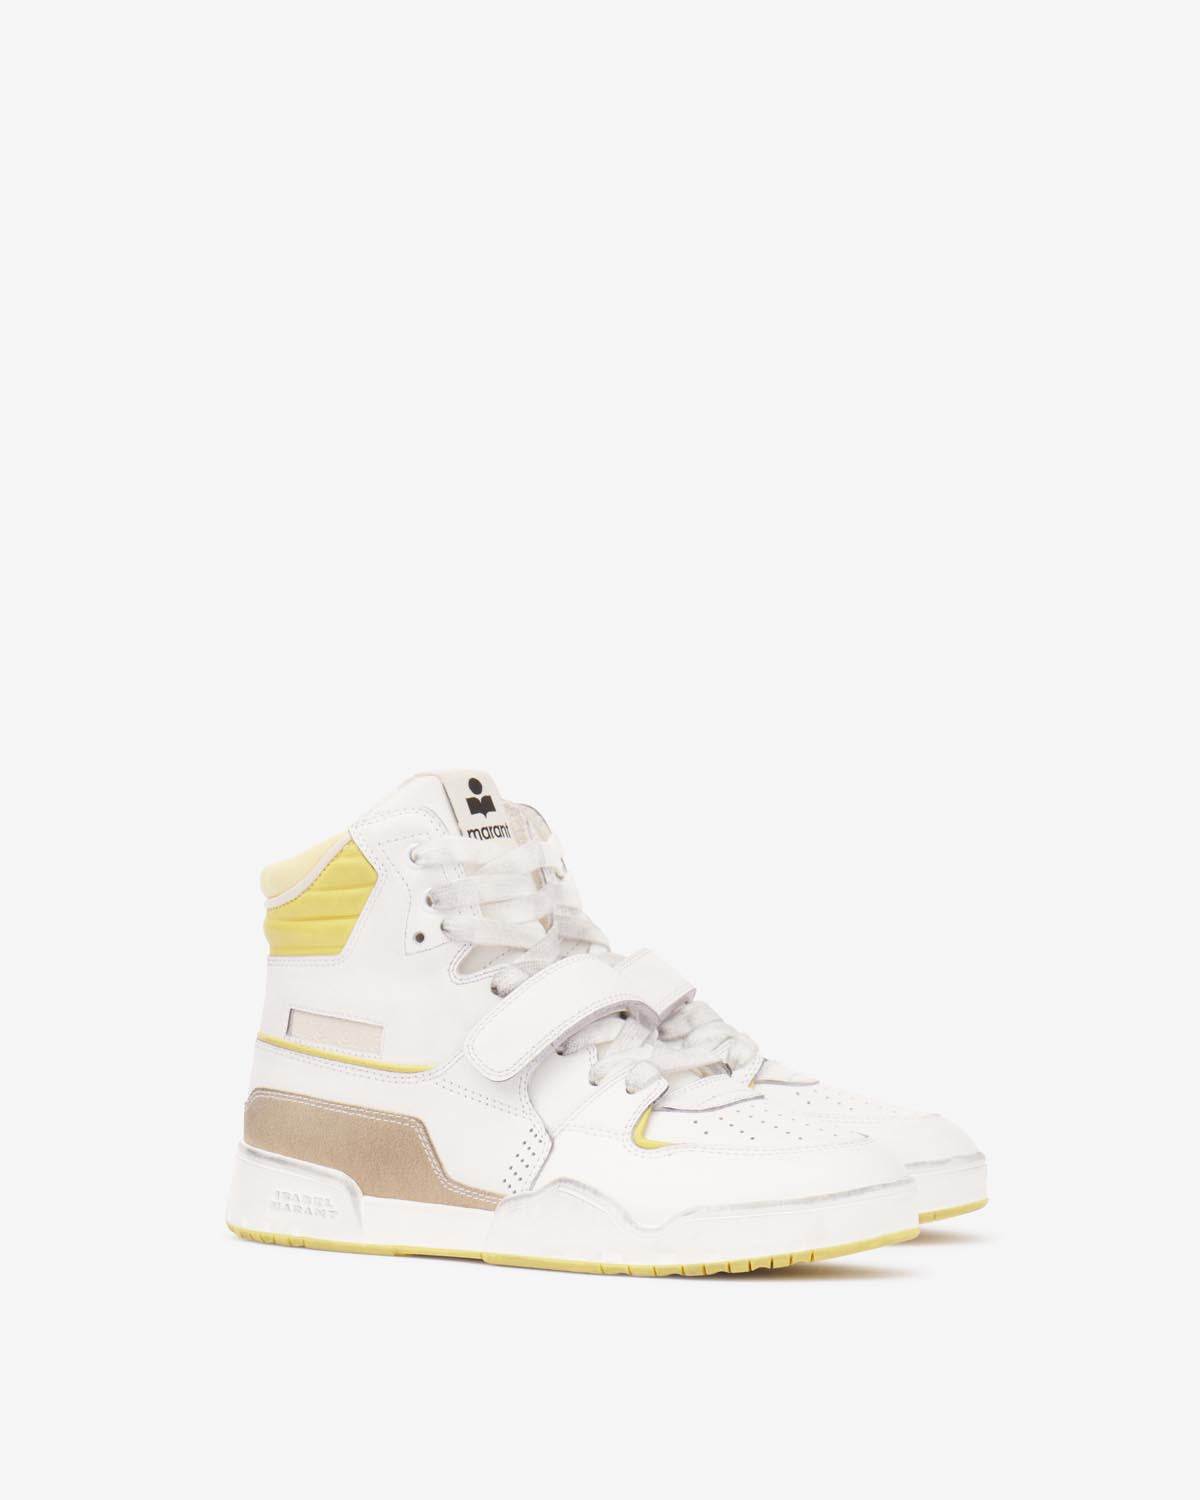 Alsee sneakers Woman Light yellow-yellow 4